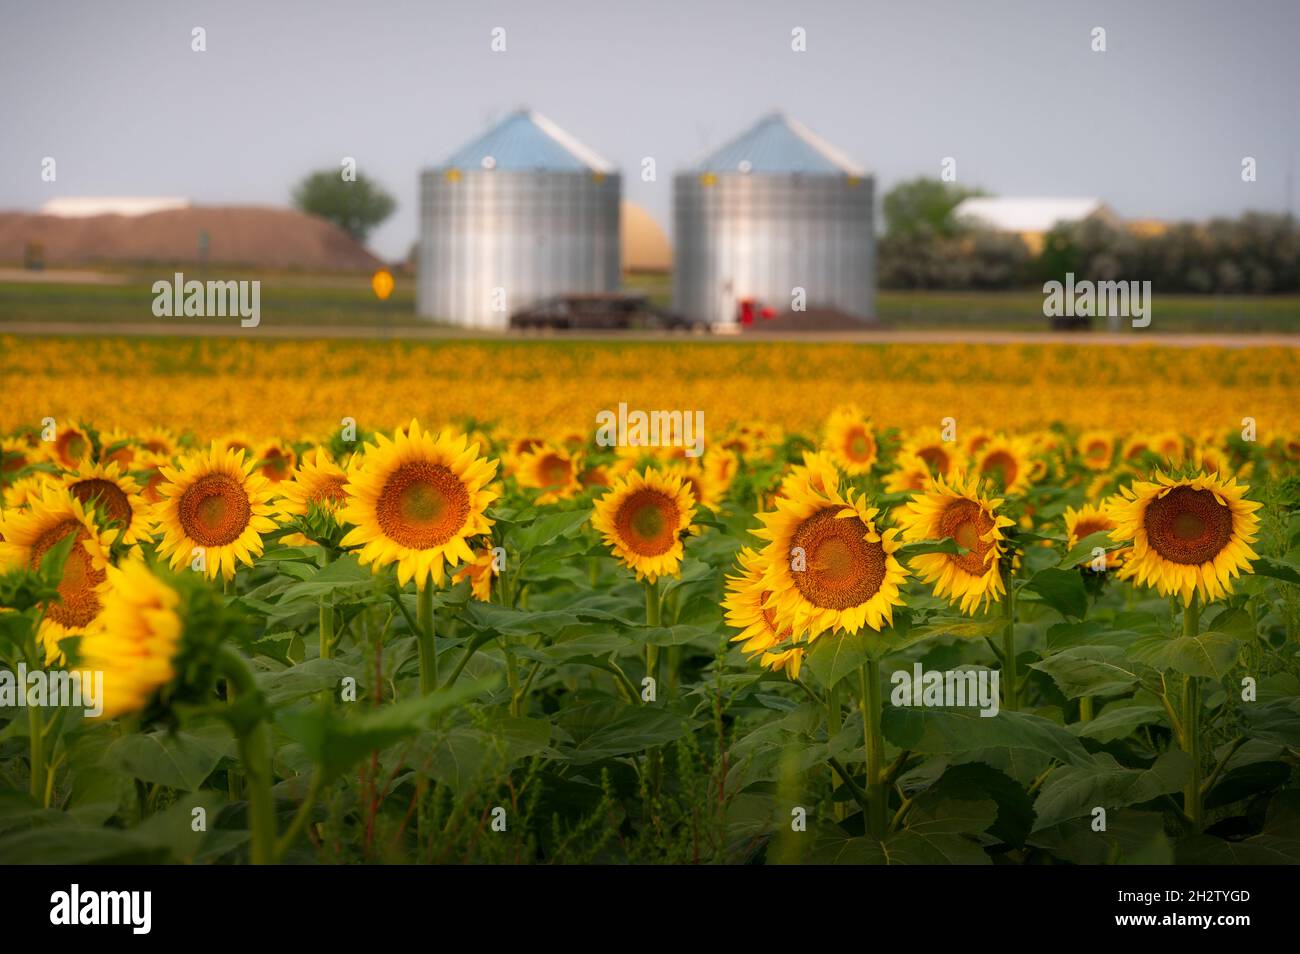 Sunflower agriculture field with background of silo in Wall, South Dakota Stock Photo